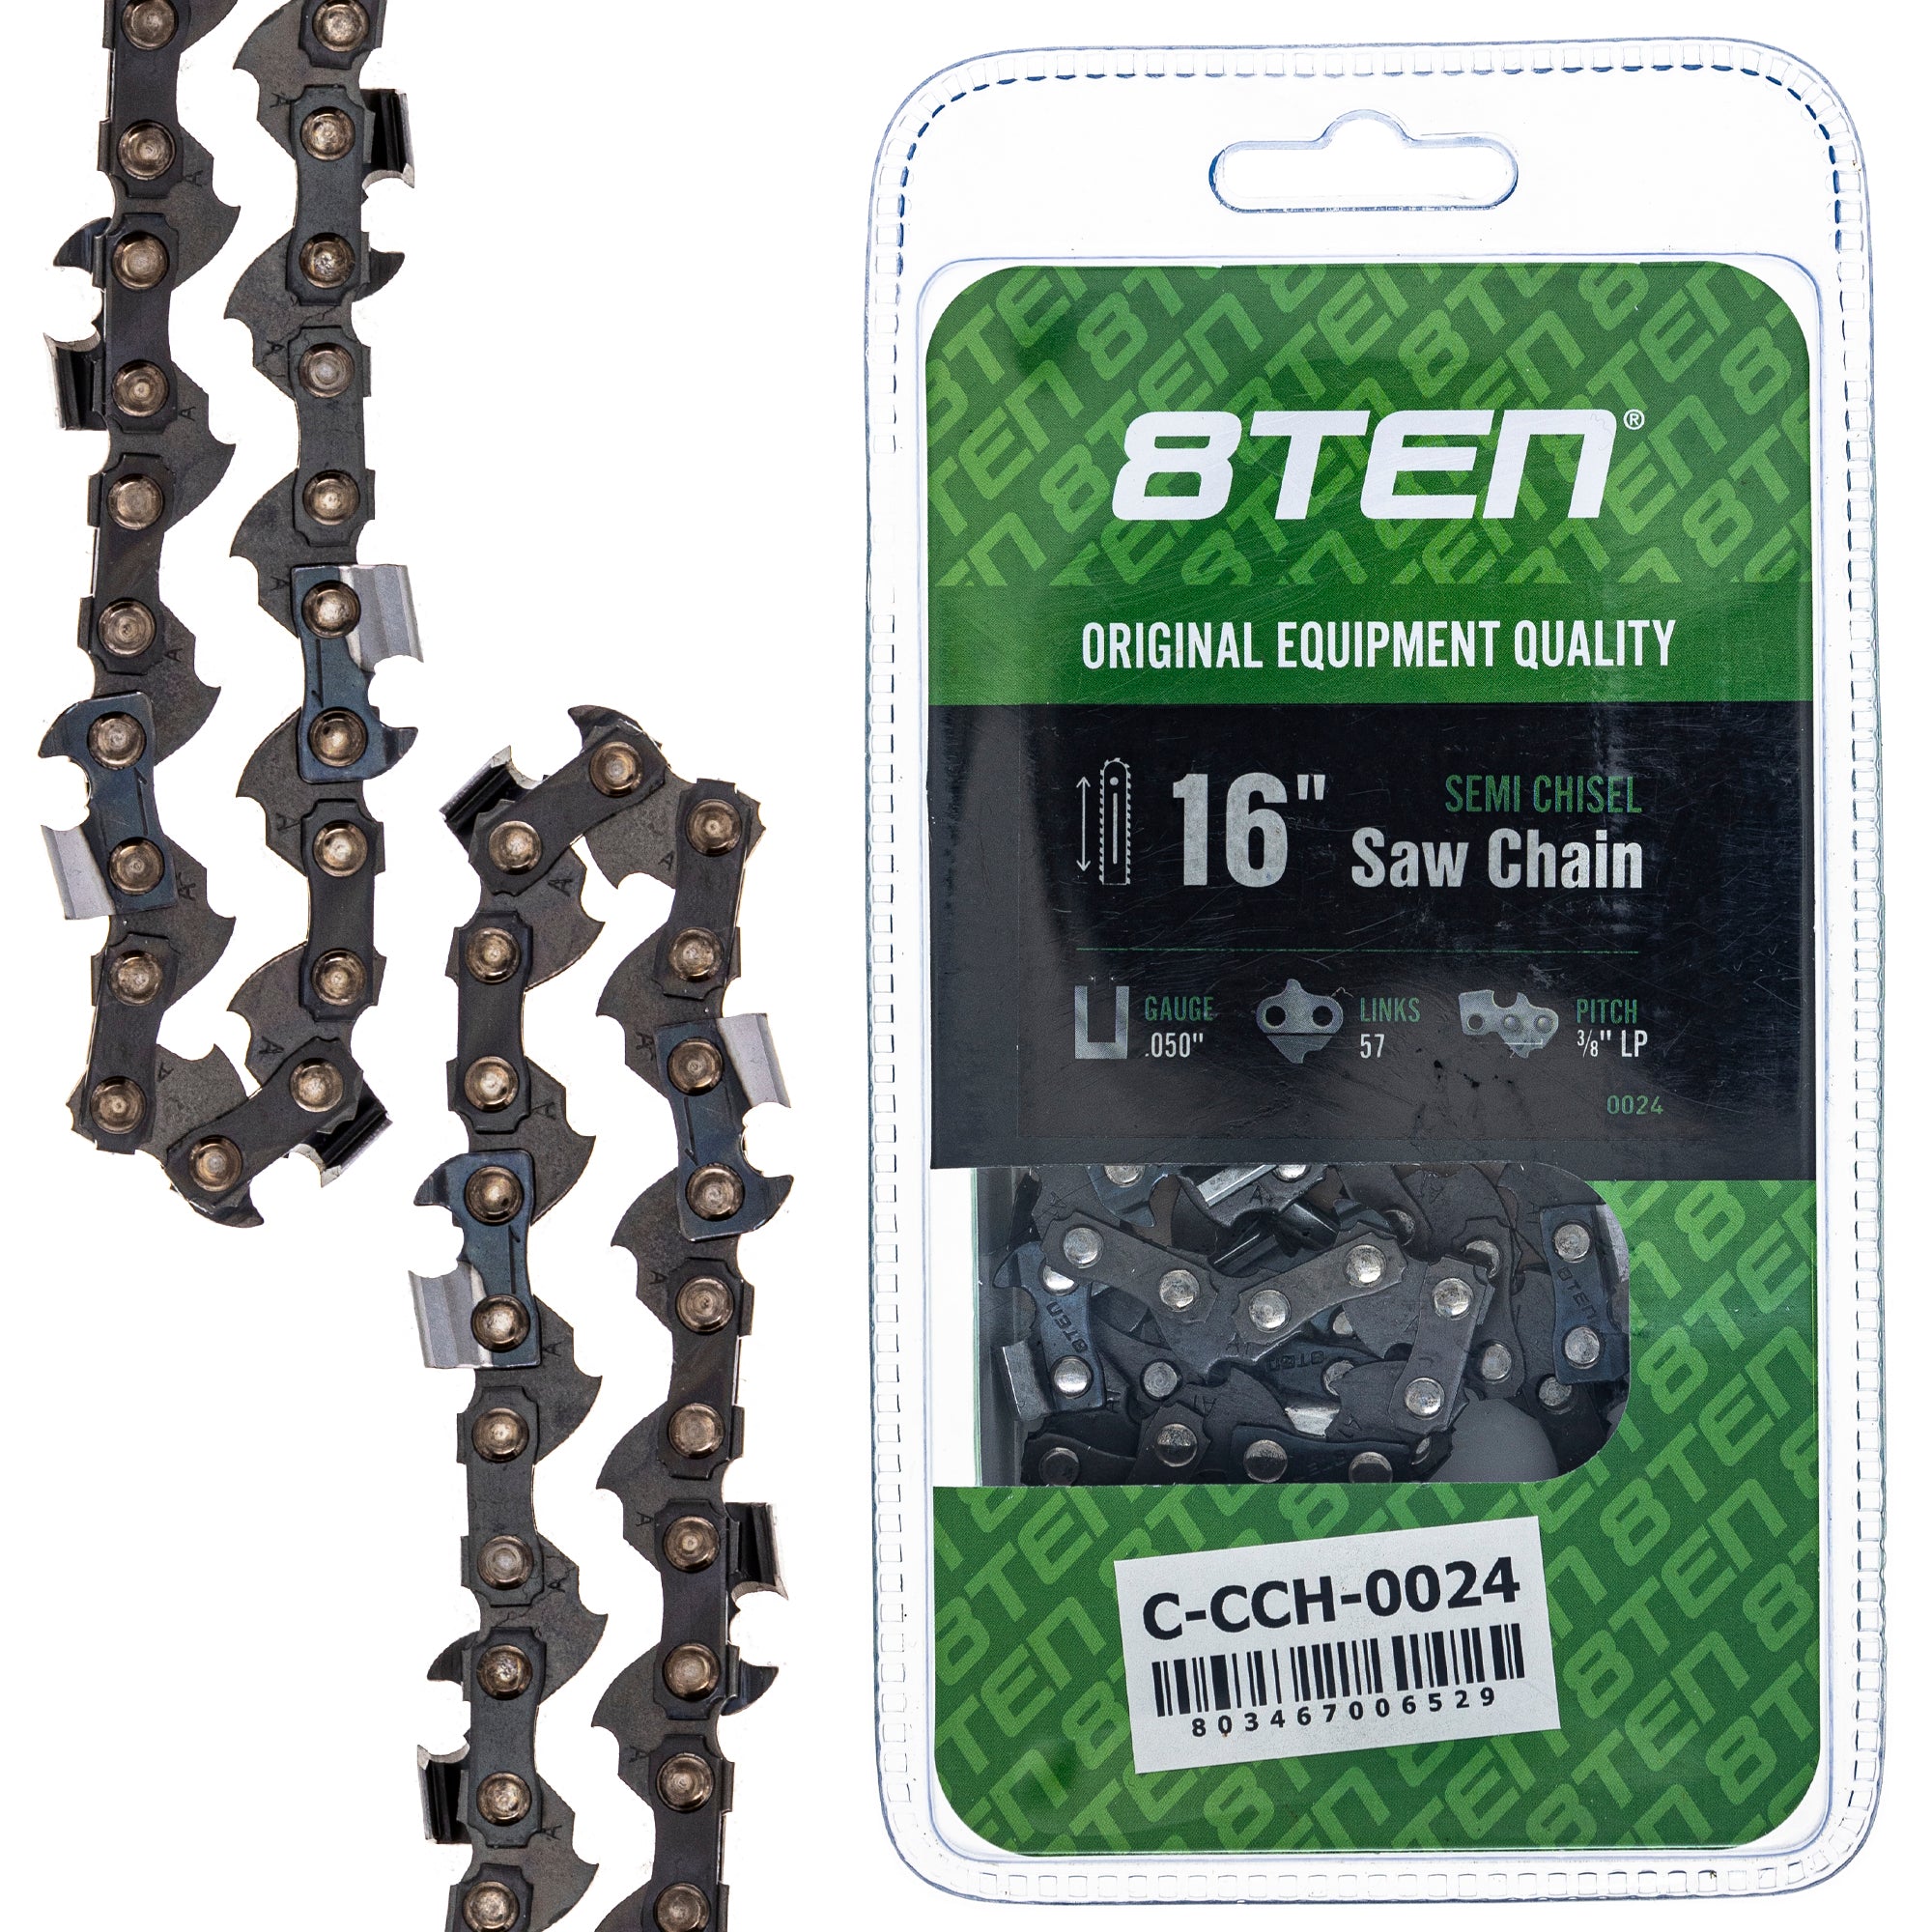 8TEN 810-CCC2246H Chain 10-Pack for zOTHER Windsor Stens Oregon GB